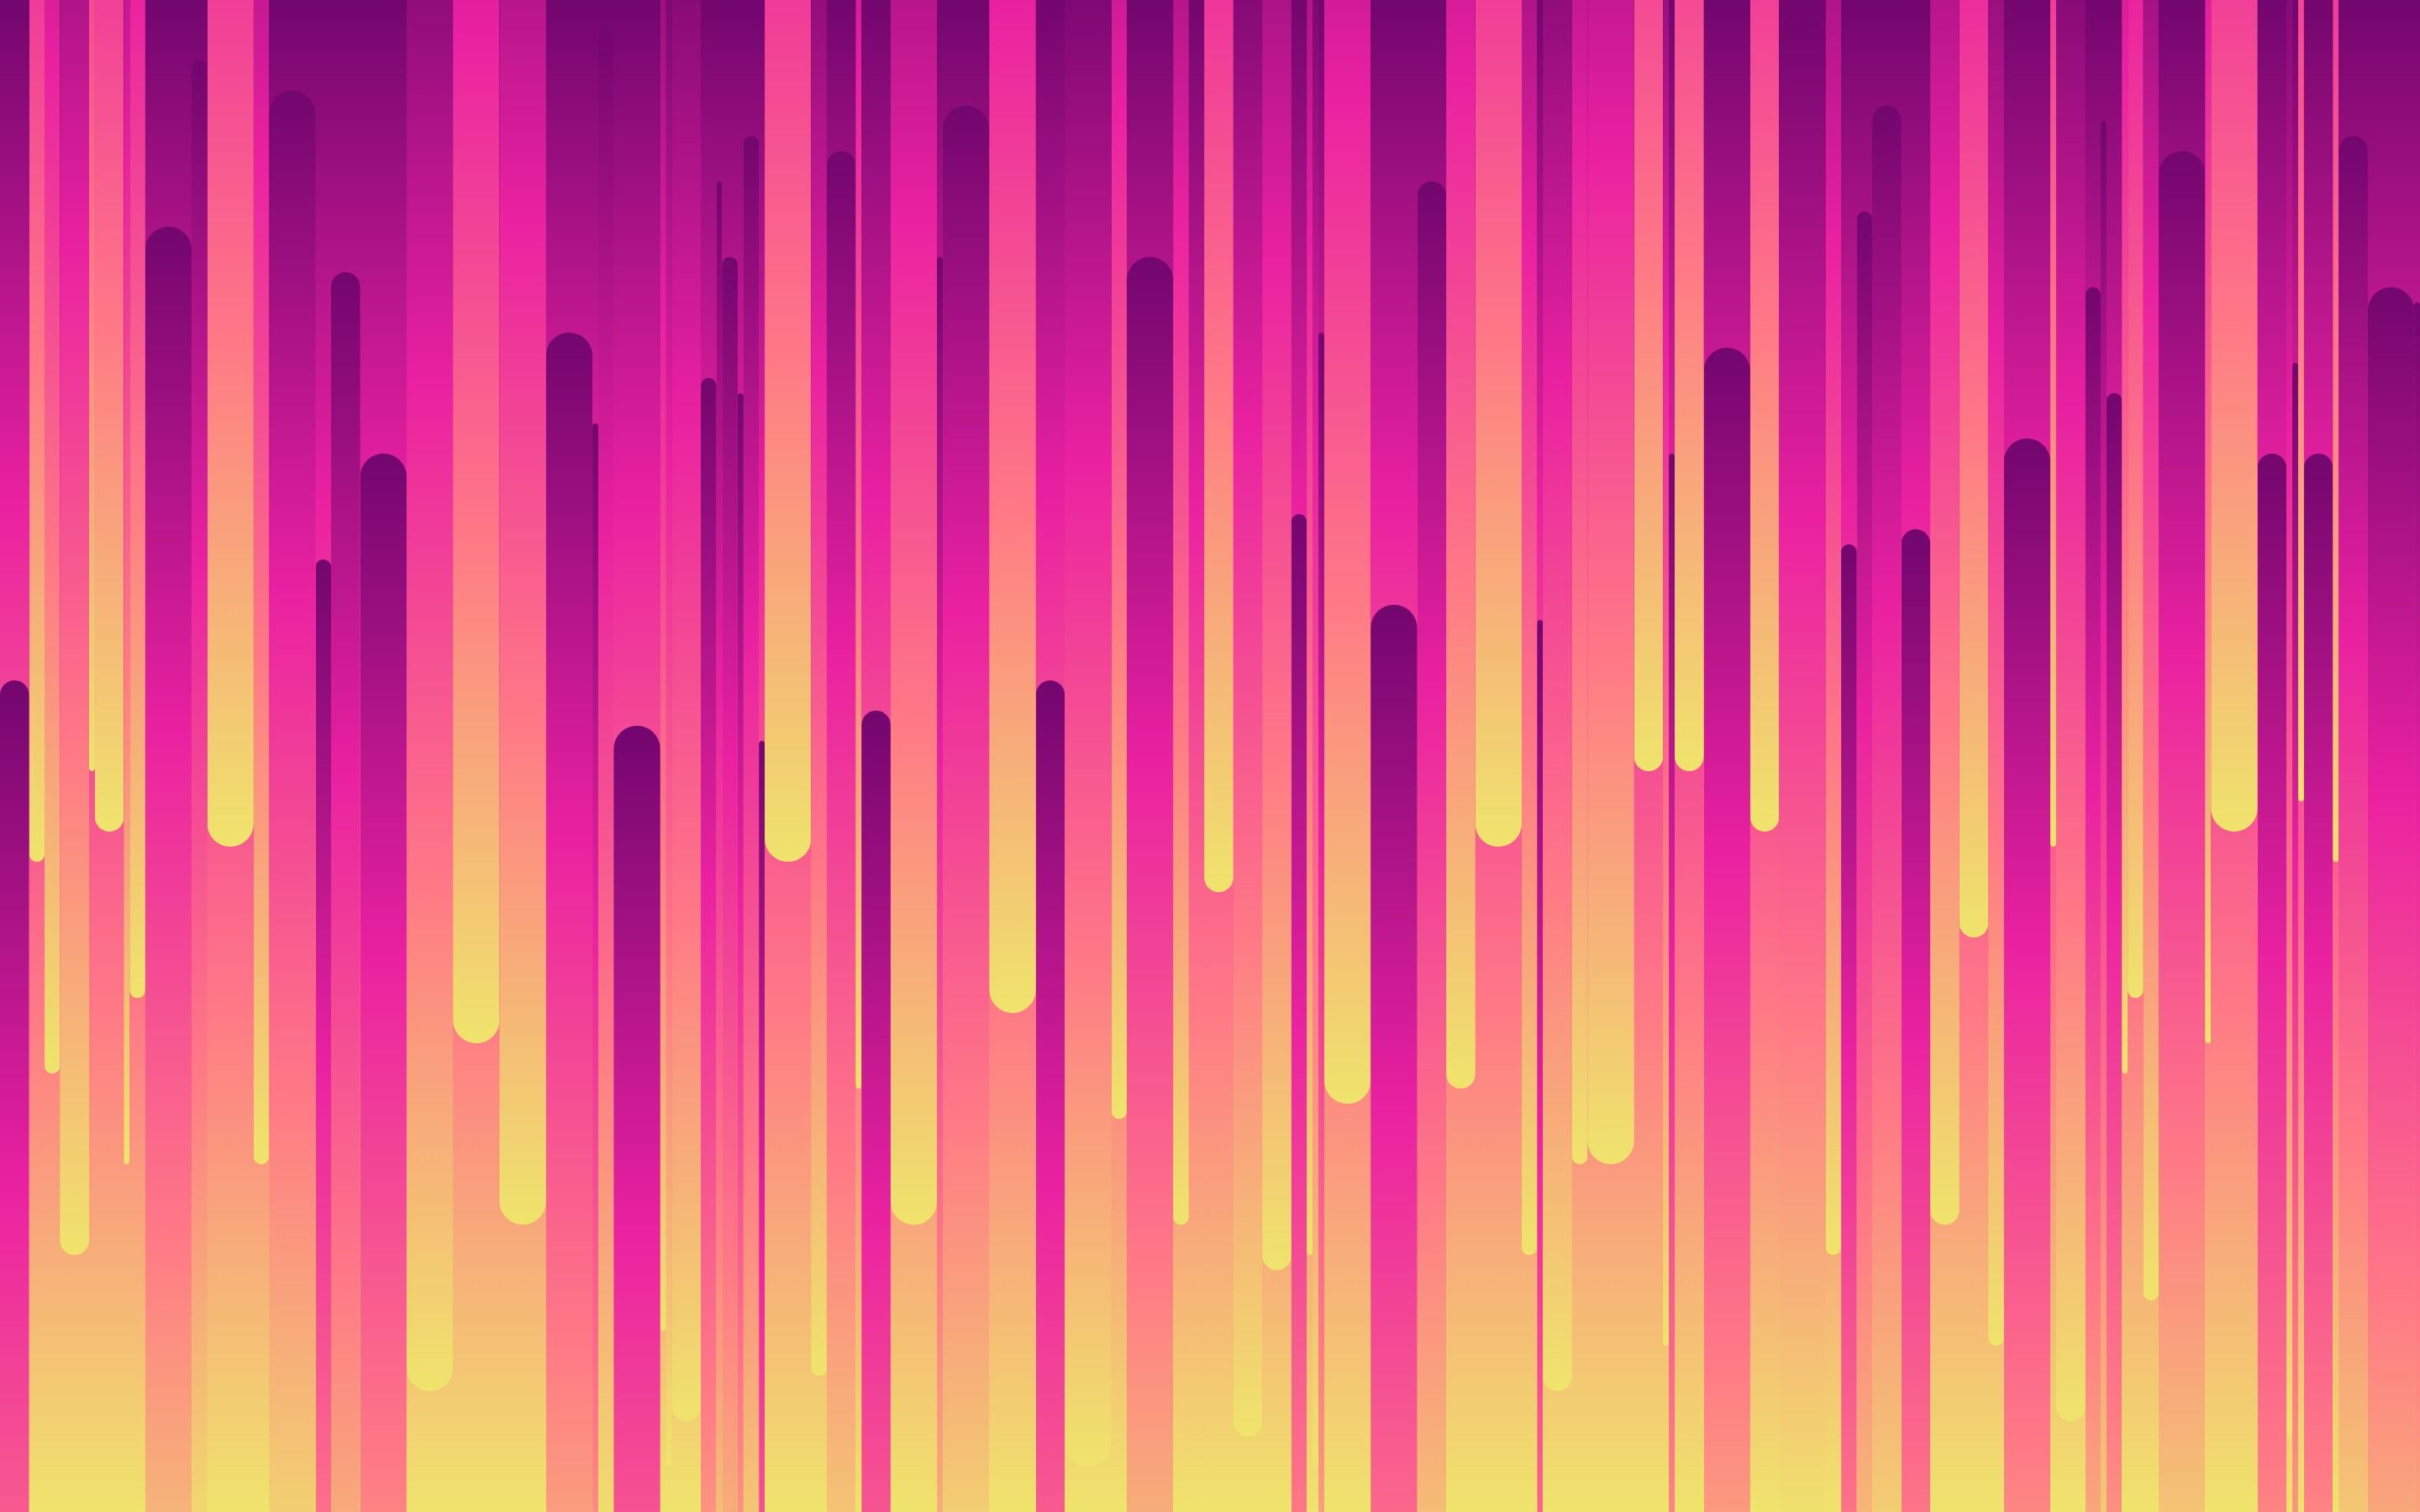 glitch 4K wallpaper for your desktop or mobile screen free